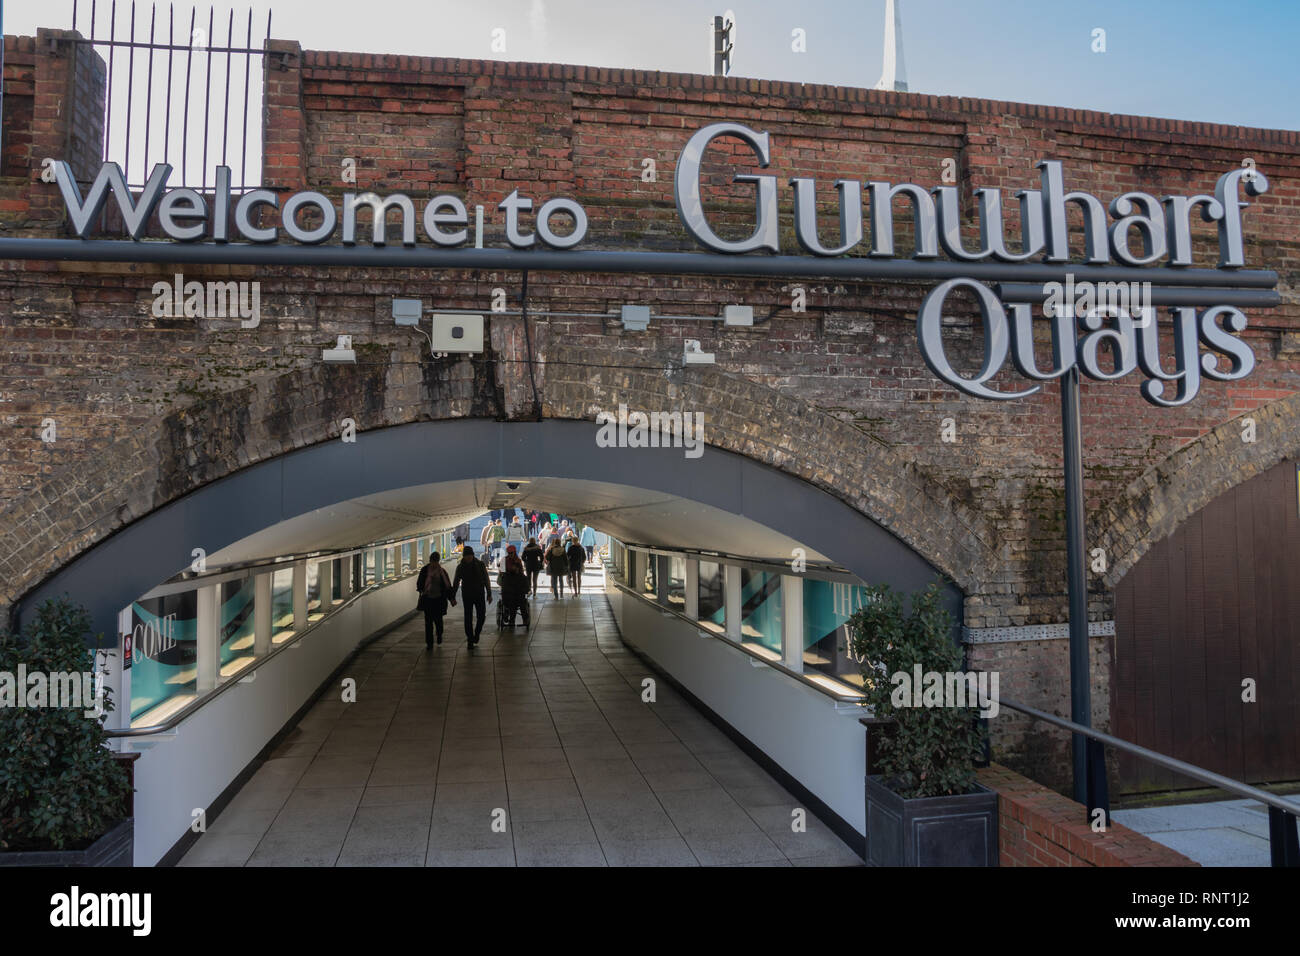 Welcome to Gunwharf quays sign and entrance tunnel Southsea, Portsmouth, Hampshire, UK Stock Photo